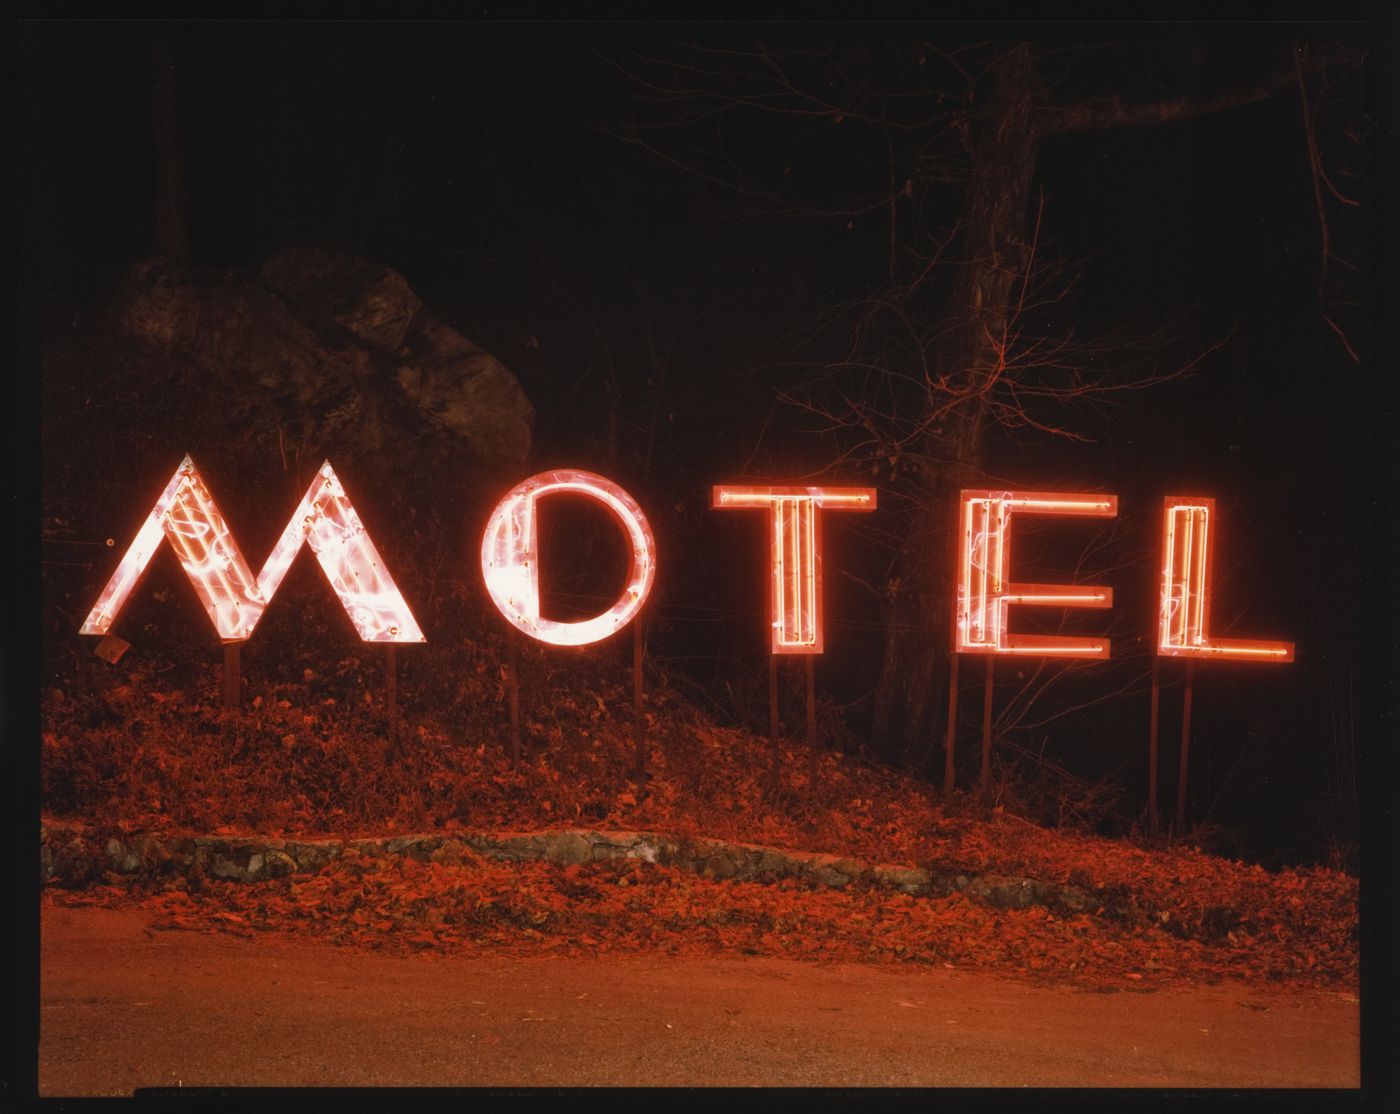 Sign for the "Senic [sic] Motel". Chattanooga, Tennessee